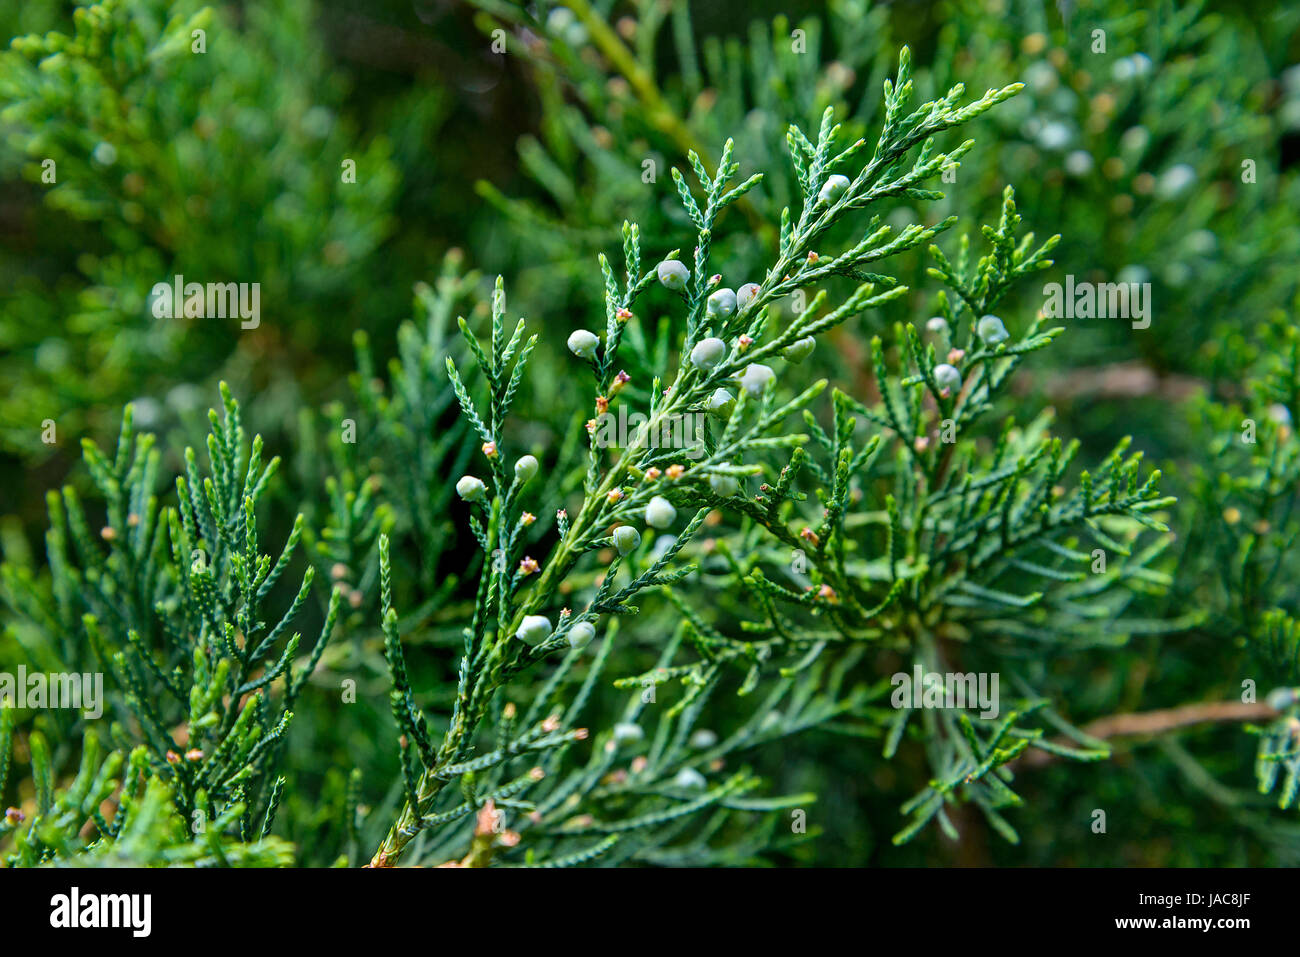 The juniper berries are photographed on branch Stock Photo